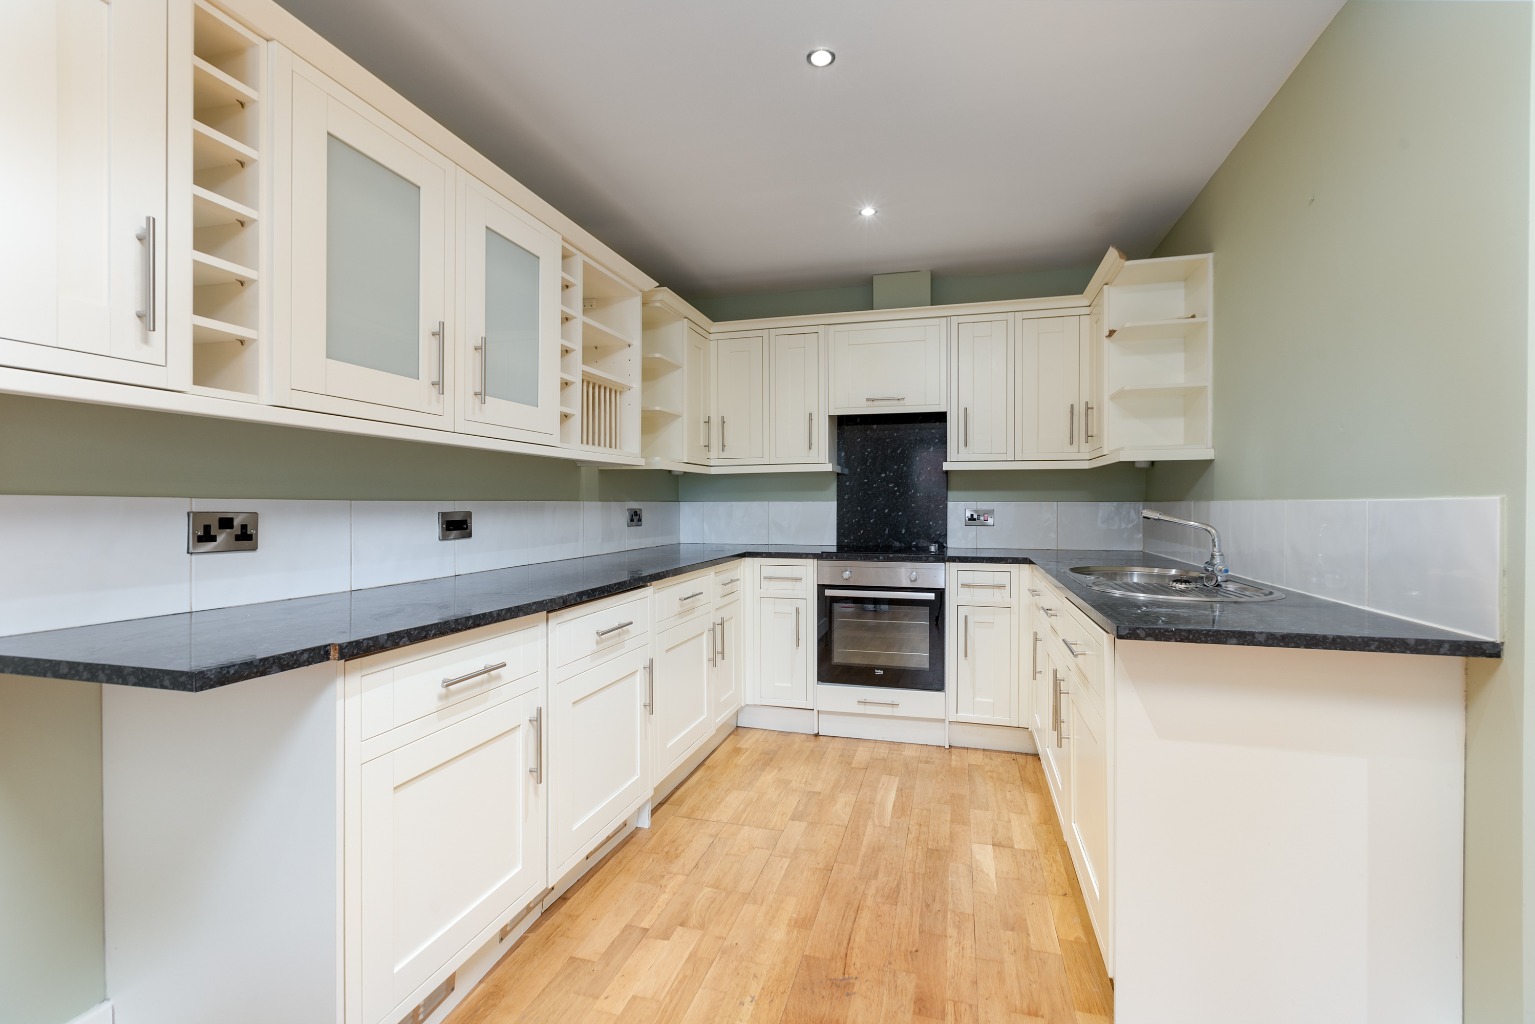 2 bed ground floor flat to rent in Hargreave Terrace, Darlington  - Property Image 3